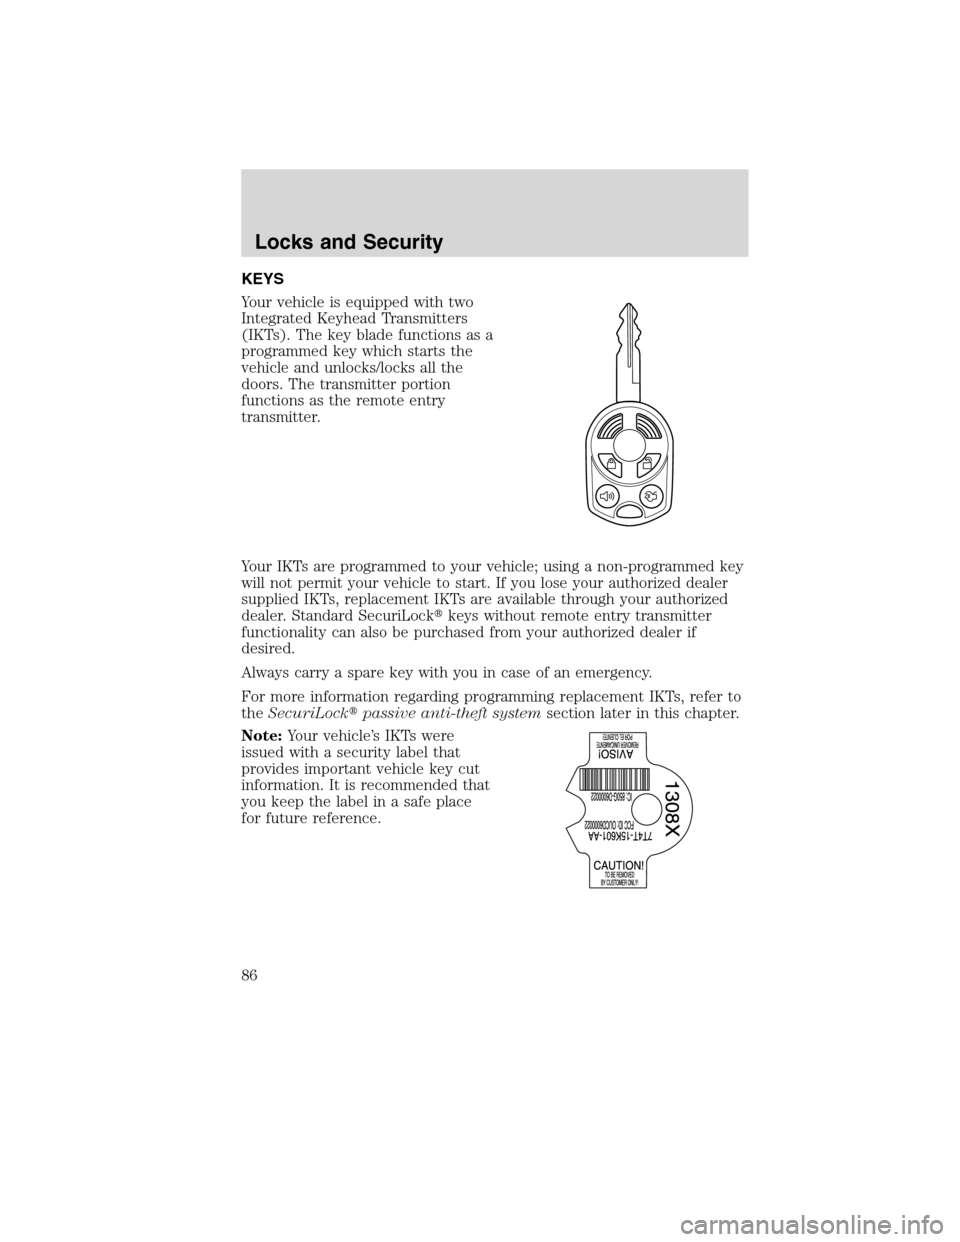 Mercury Milan 2010  Owners Manuals KEYS
Your vehicle is equipped with two
Integrated Keyhead Transmitters
(IKTs). The key blade functions as a
programmed key which starts the
vehicle and unlocks/locks all the
doors. The transmitter por